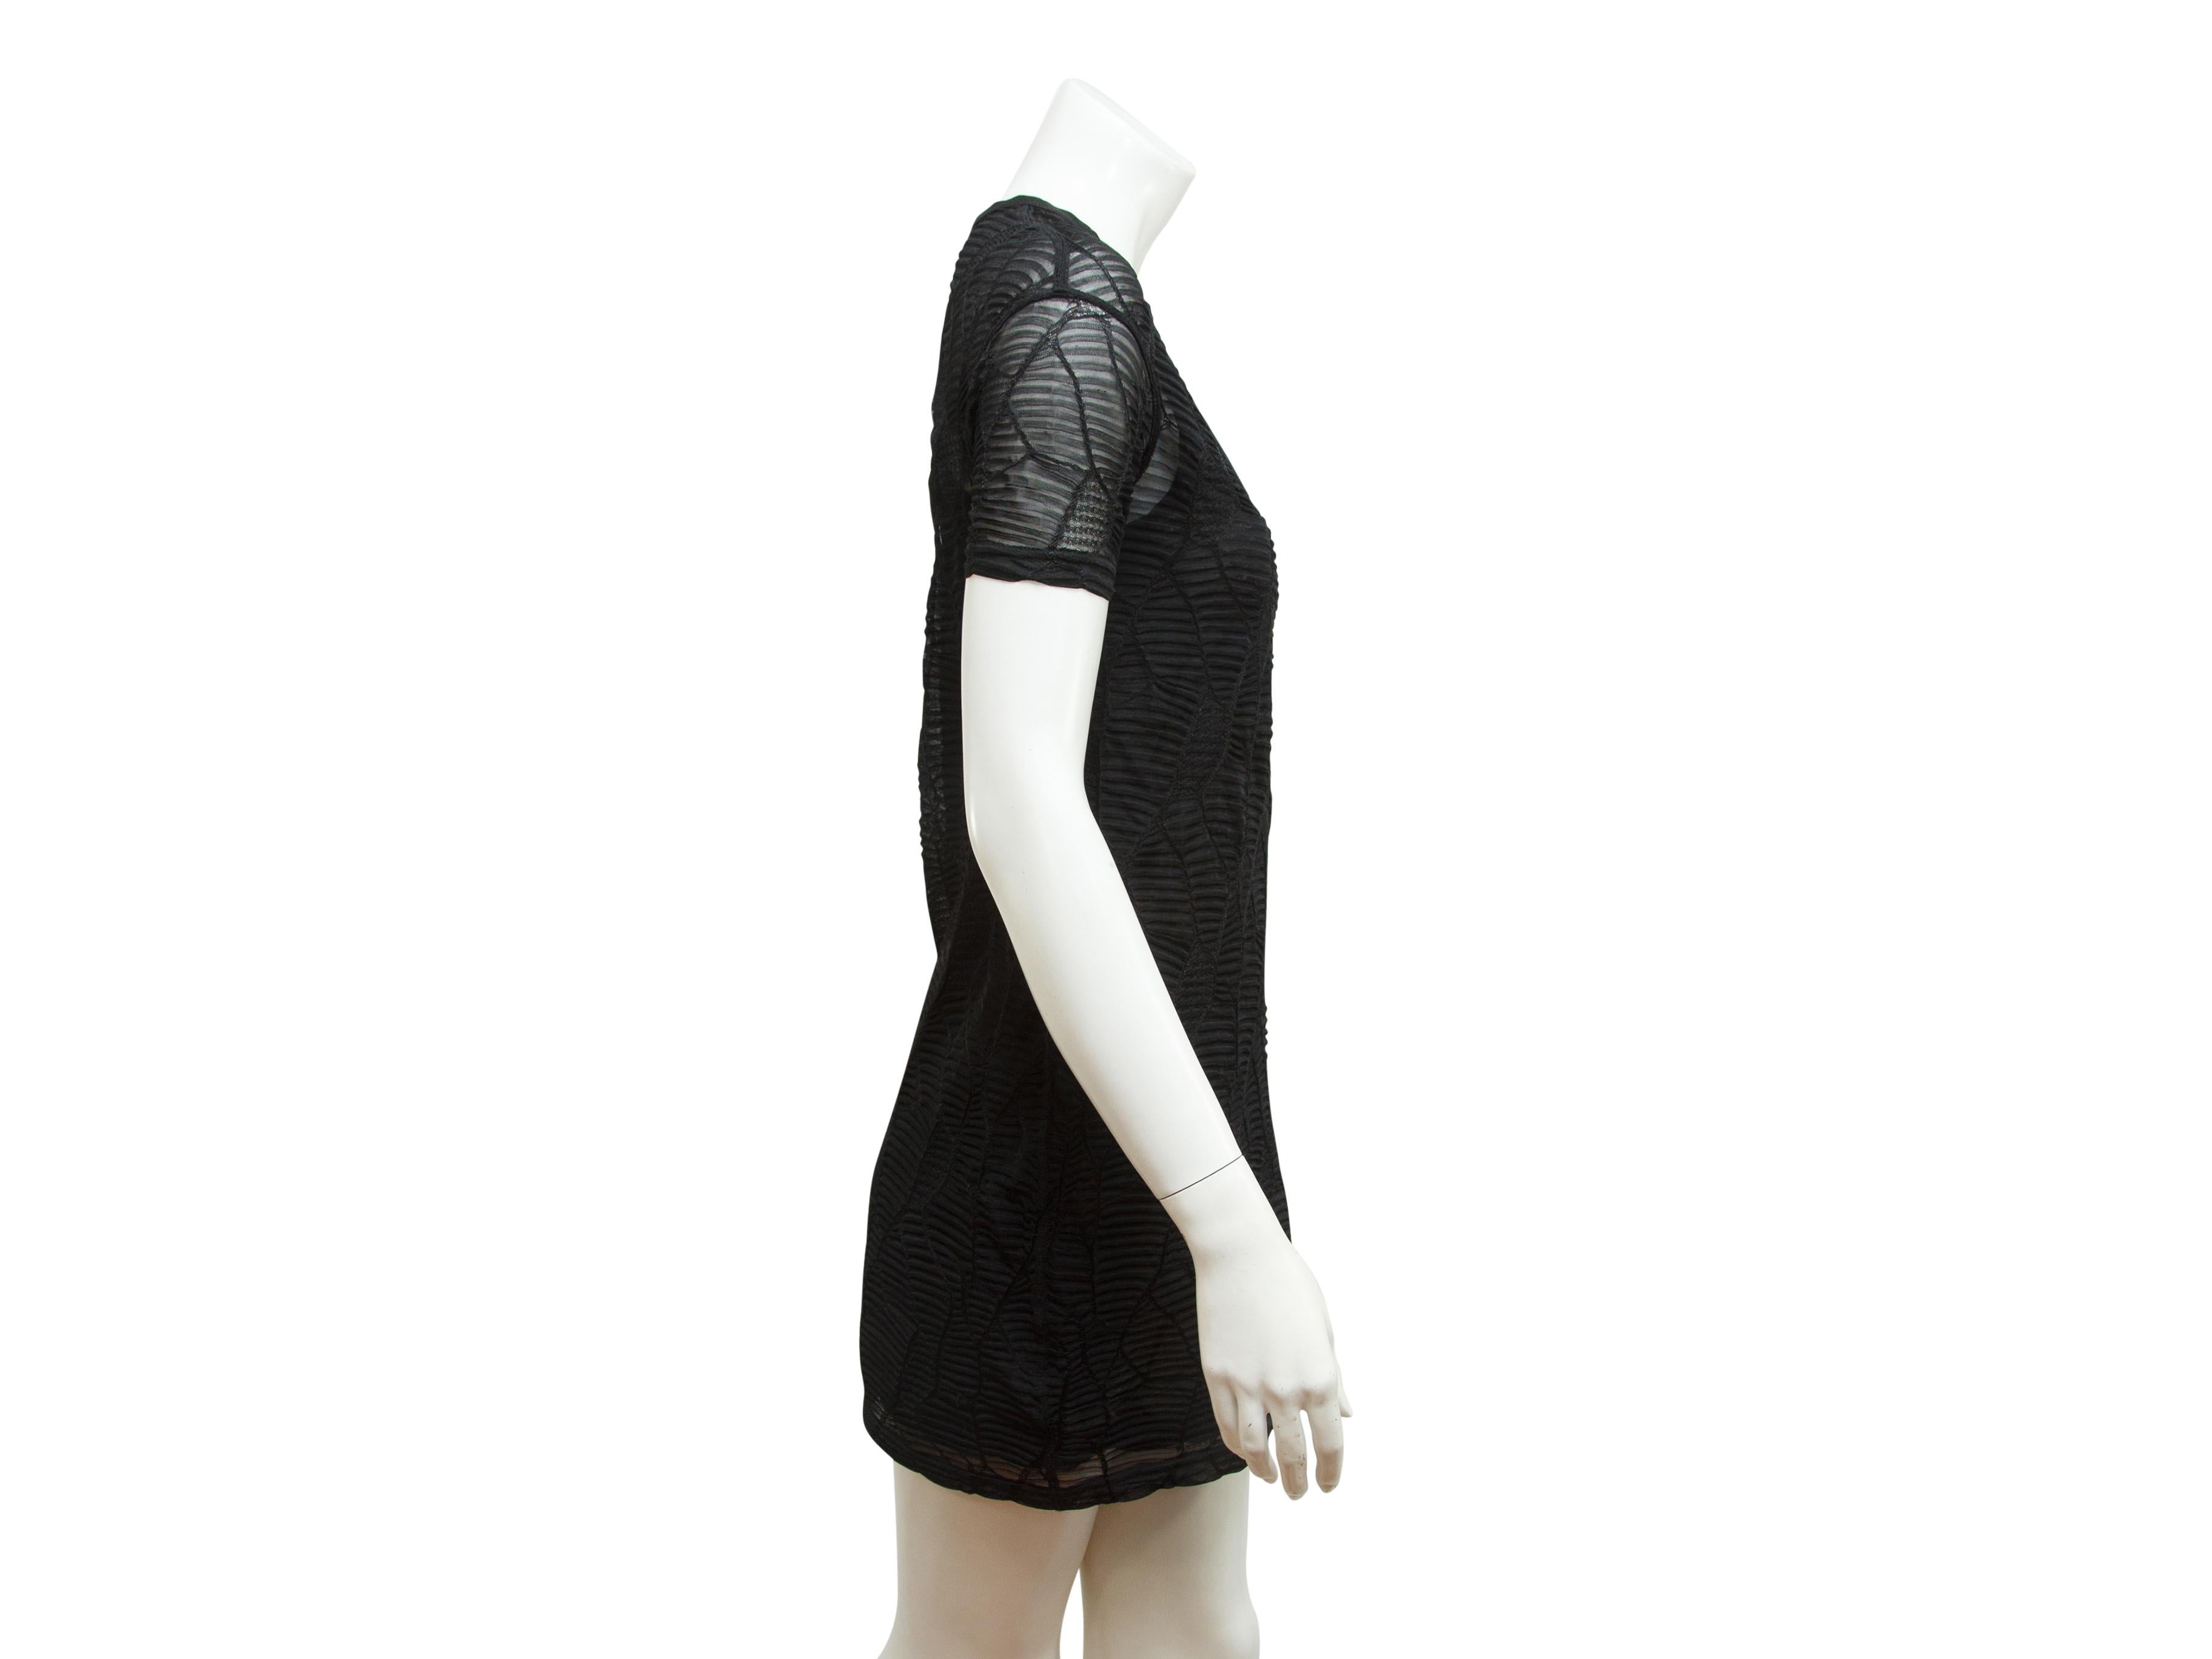 Product details:  Black textured tunic top by Junya Watanabe Comme des Garcon.  Crewneck.  Short sleeves.  Pullover style.  31